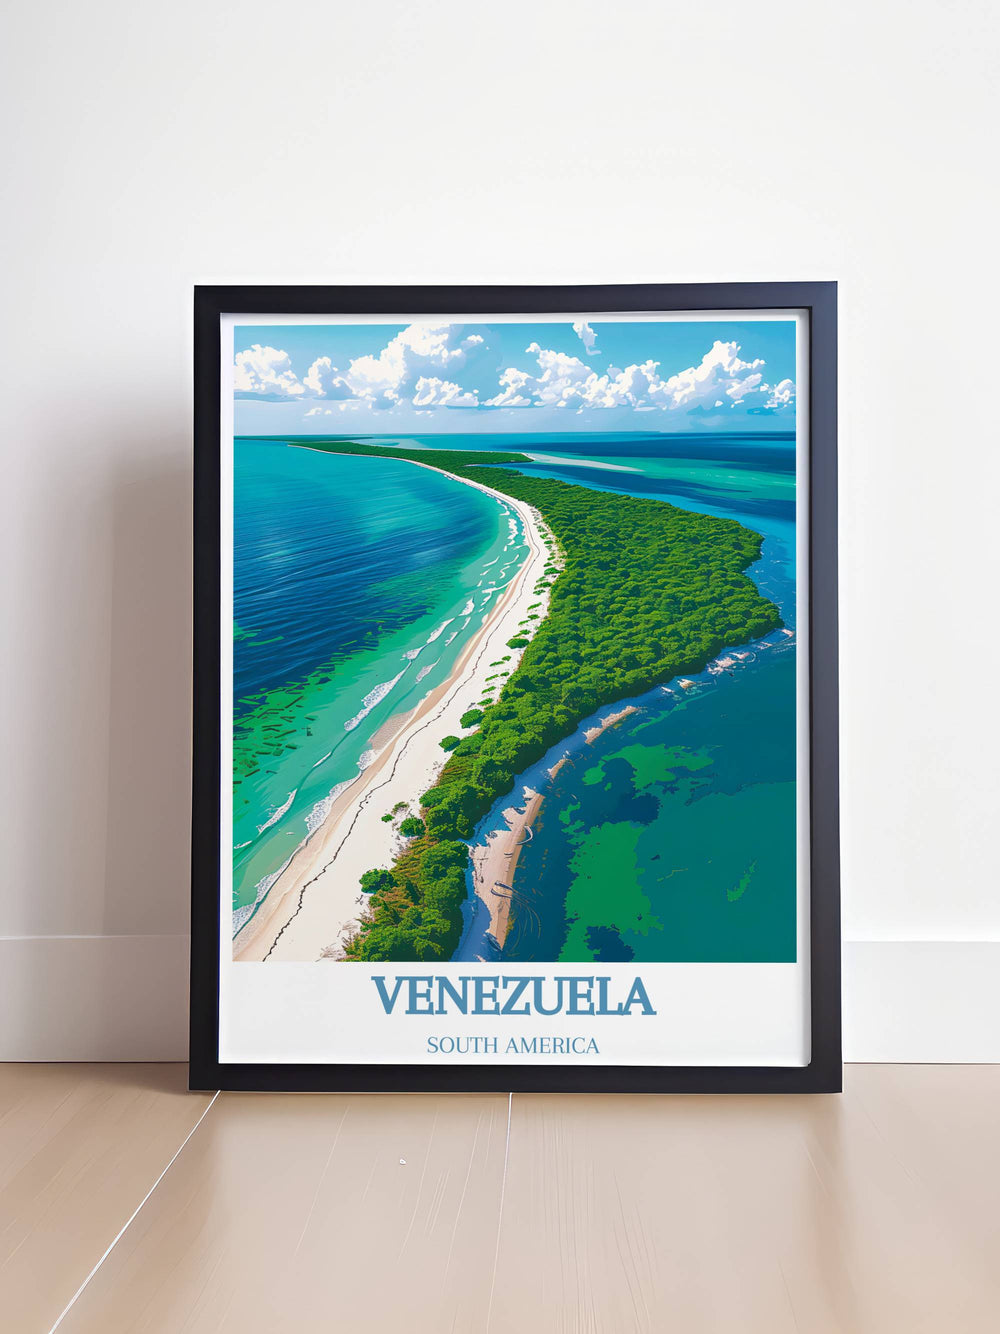 Morrocoy National Park Poster featuring serene beaches and crystal clear waters, bringing the tranquil beauty of this Venezuelan paradise into your home decor.